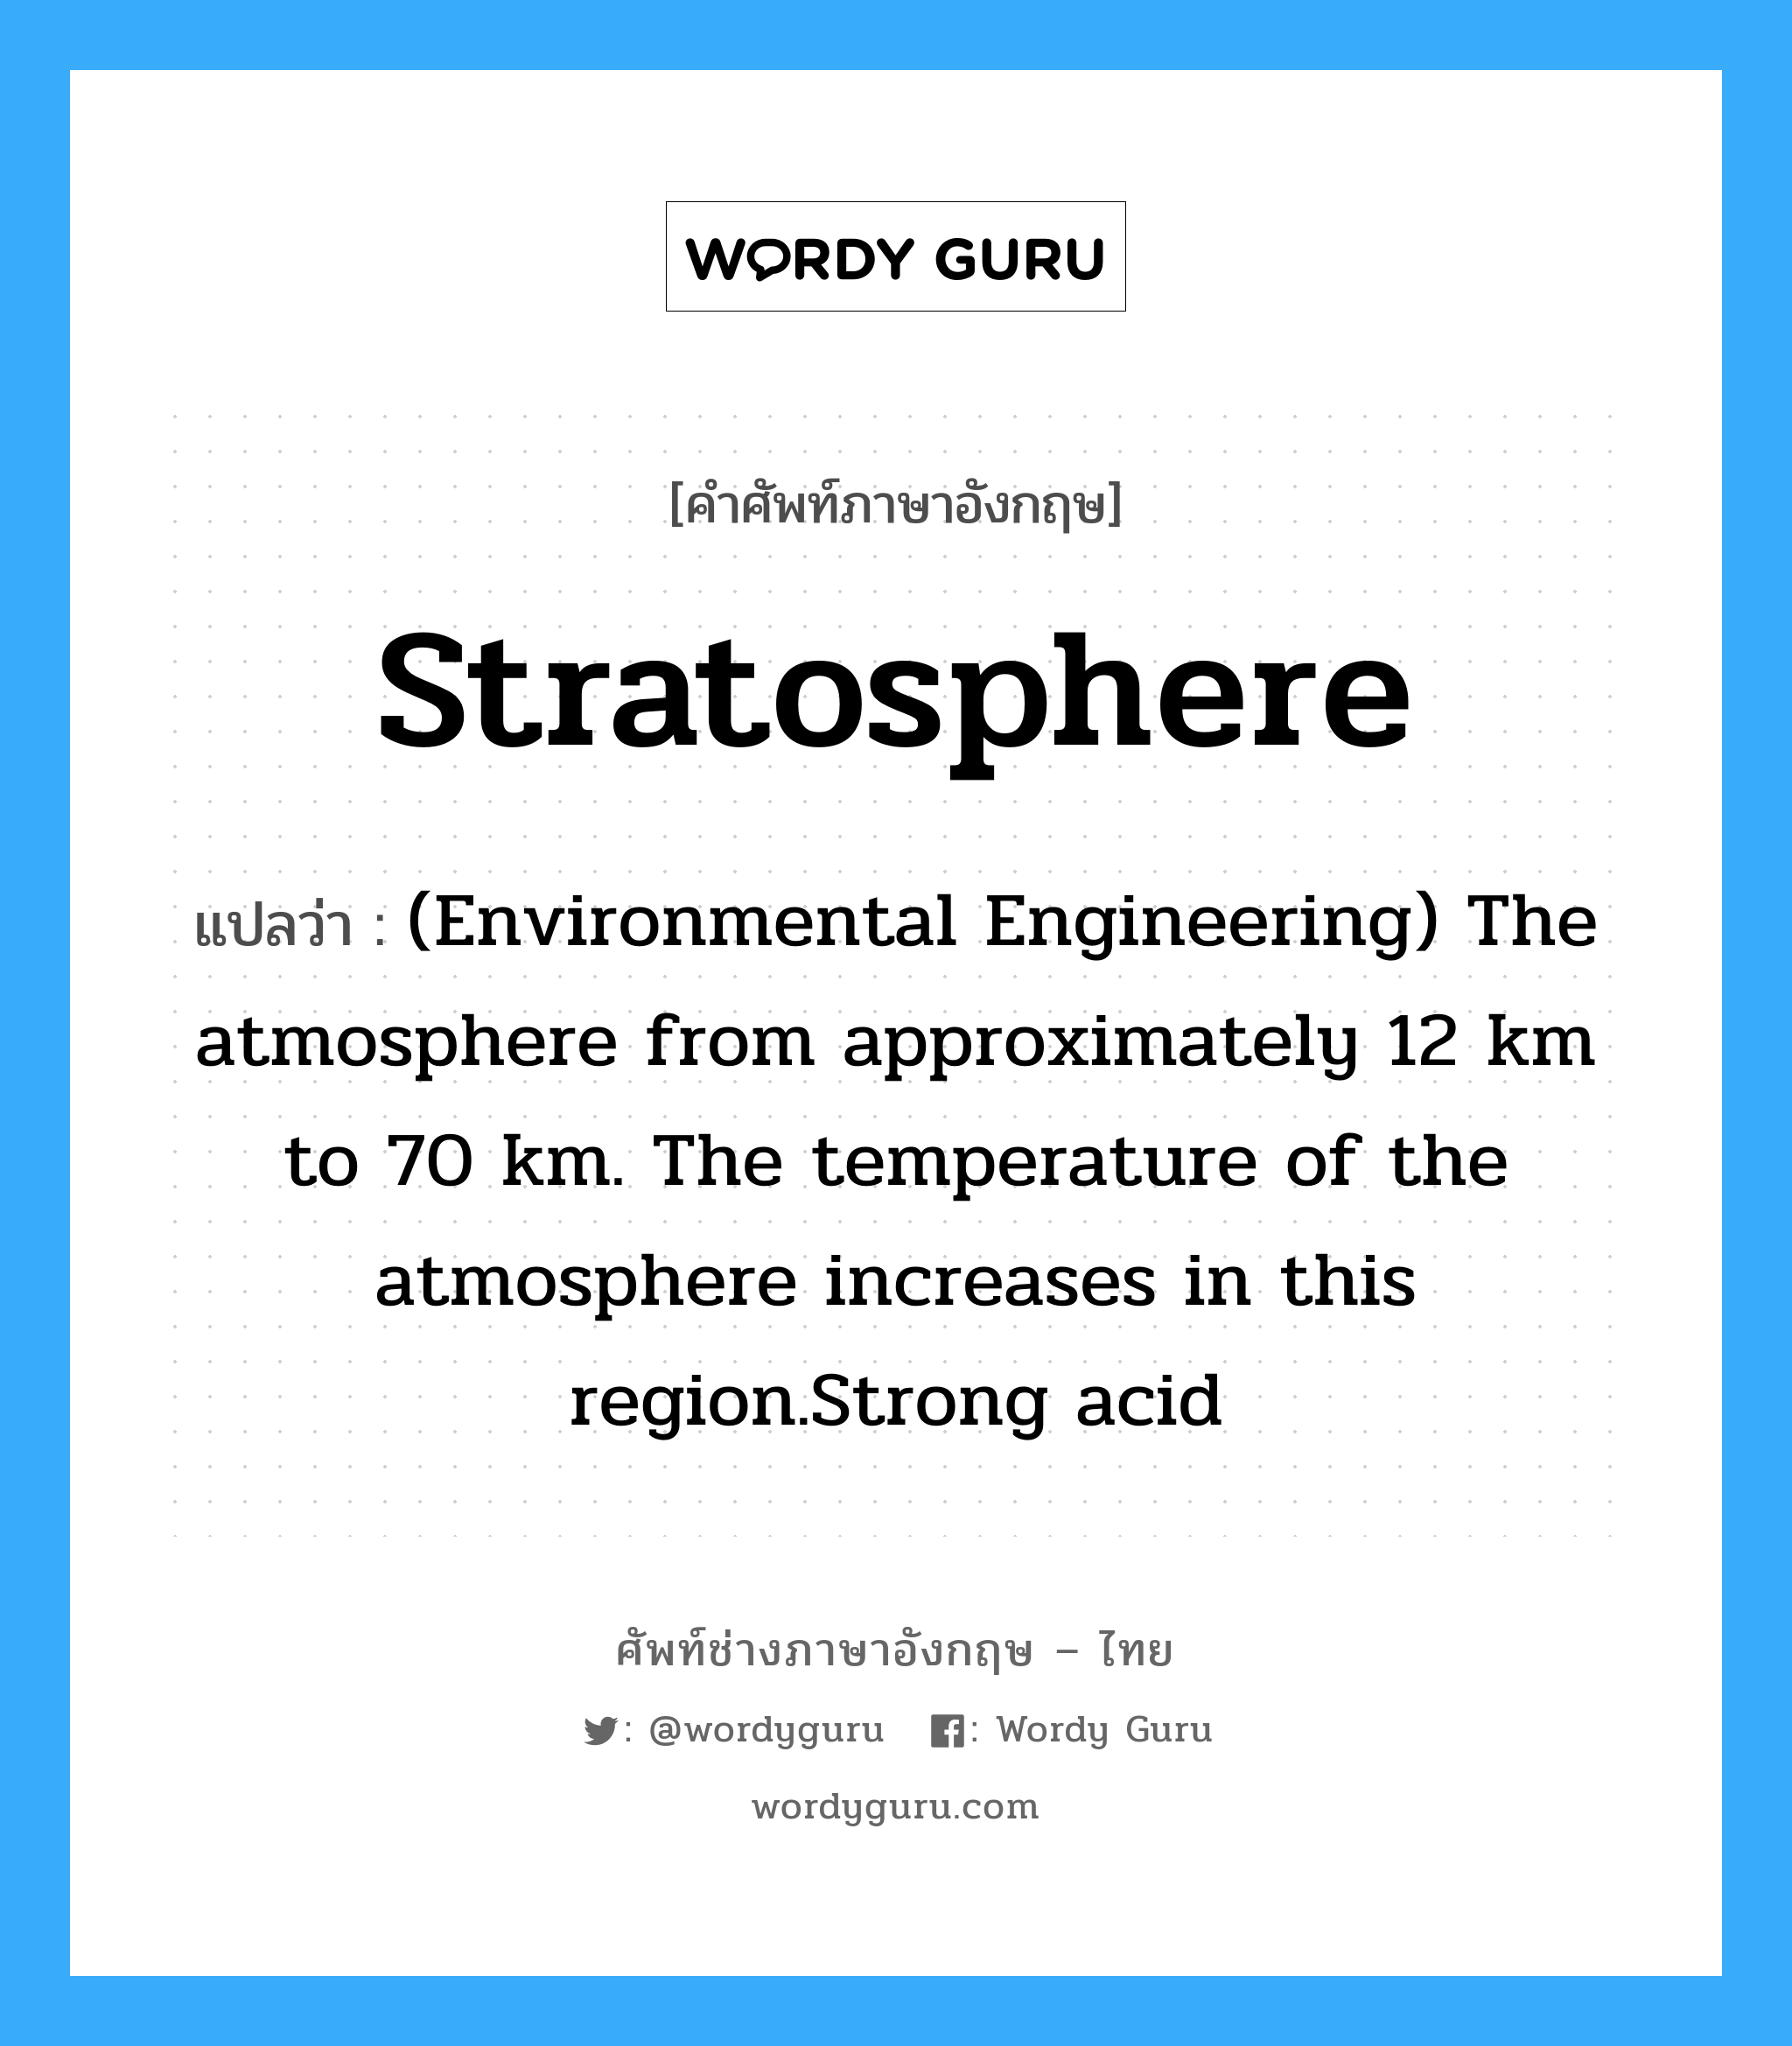 (Environmental Engineering) The atmosphere from approximately 12 km to 70 km. The temperature of the atmosphere increases in this region.Strong acid ภาษาอังกฤษ?, คำศัพท์ช่างภาษาอังกฤษ - ไทย (Environmental Engineering) The atmosphere from approximately 12 km to 70 km. The temperature of the atmosphere increases in this region.Strong acid คำศัพท์ภาษาอังกฤษ (Environmental Engineering) The atmosphere from approximately 12 km to 70 km. The temperature of the atmosphere increases in this region.Strong acid แปลว่า Stratosphere